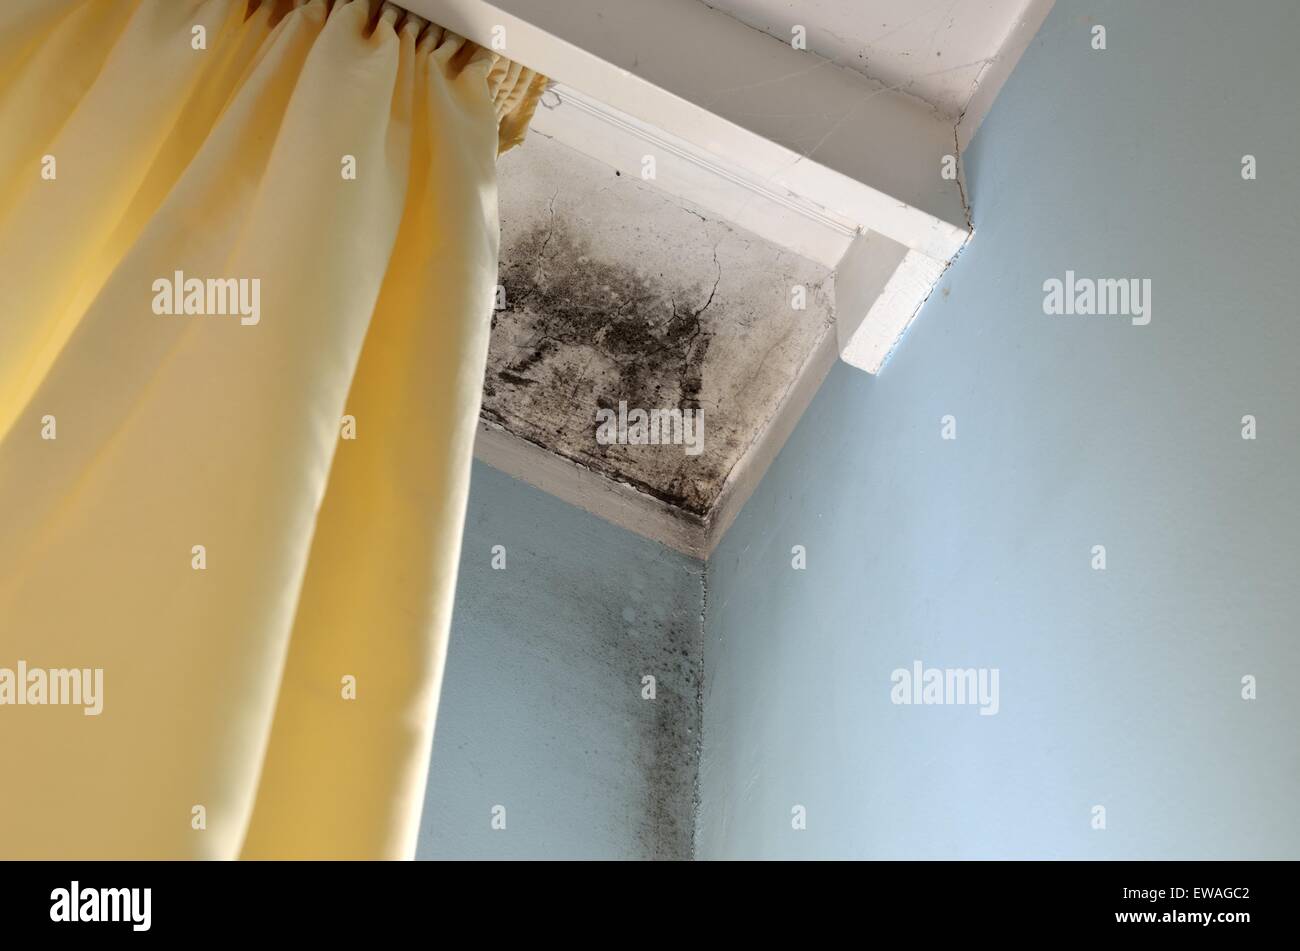 Mold In The Corner Of The White Ceiling And Blue Wall With Yellow